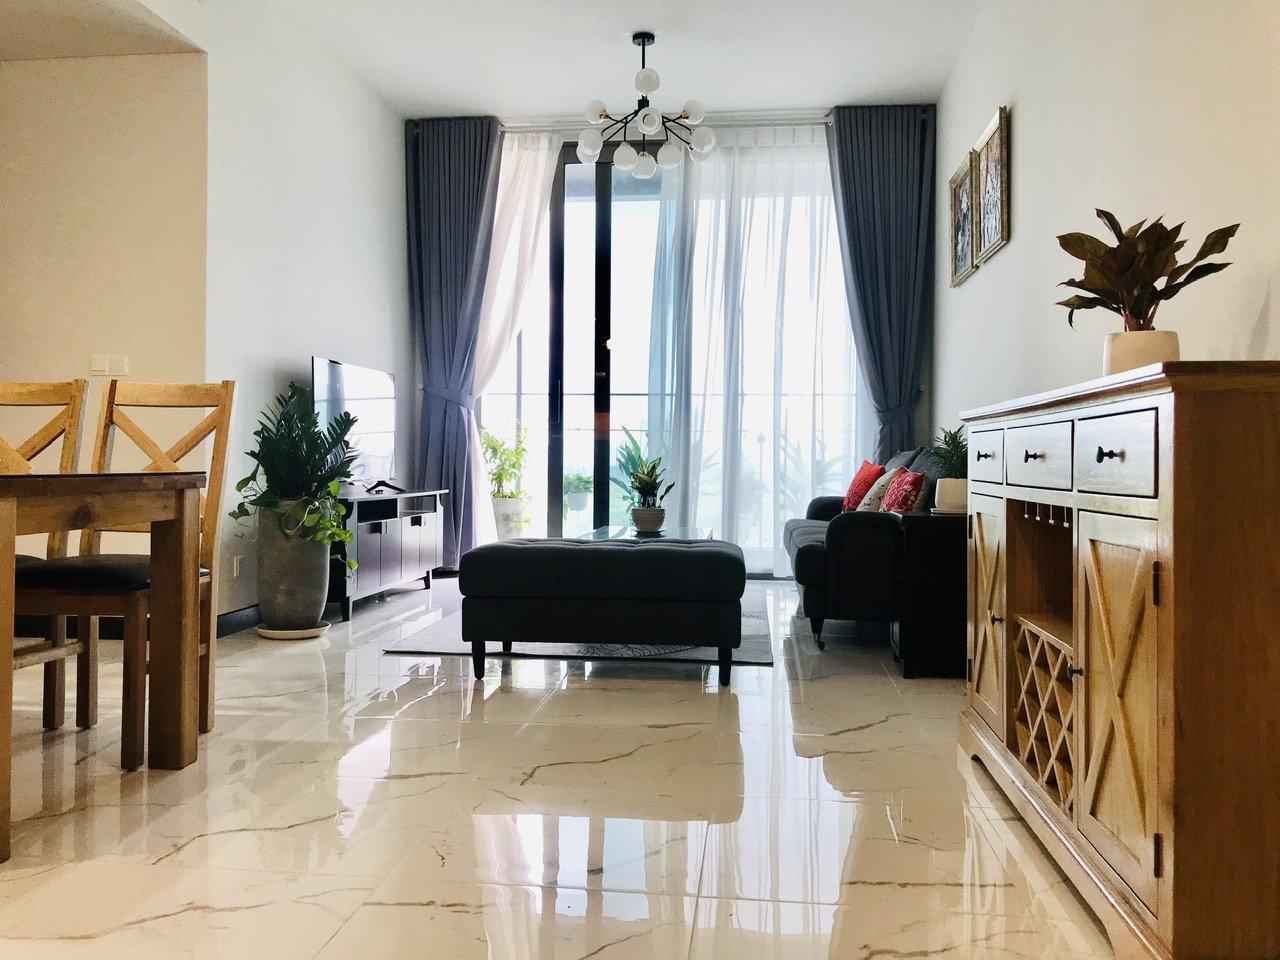 Empire city for rent, 1400$ 92m2 full furnished apartment 1